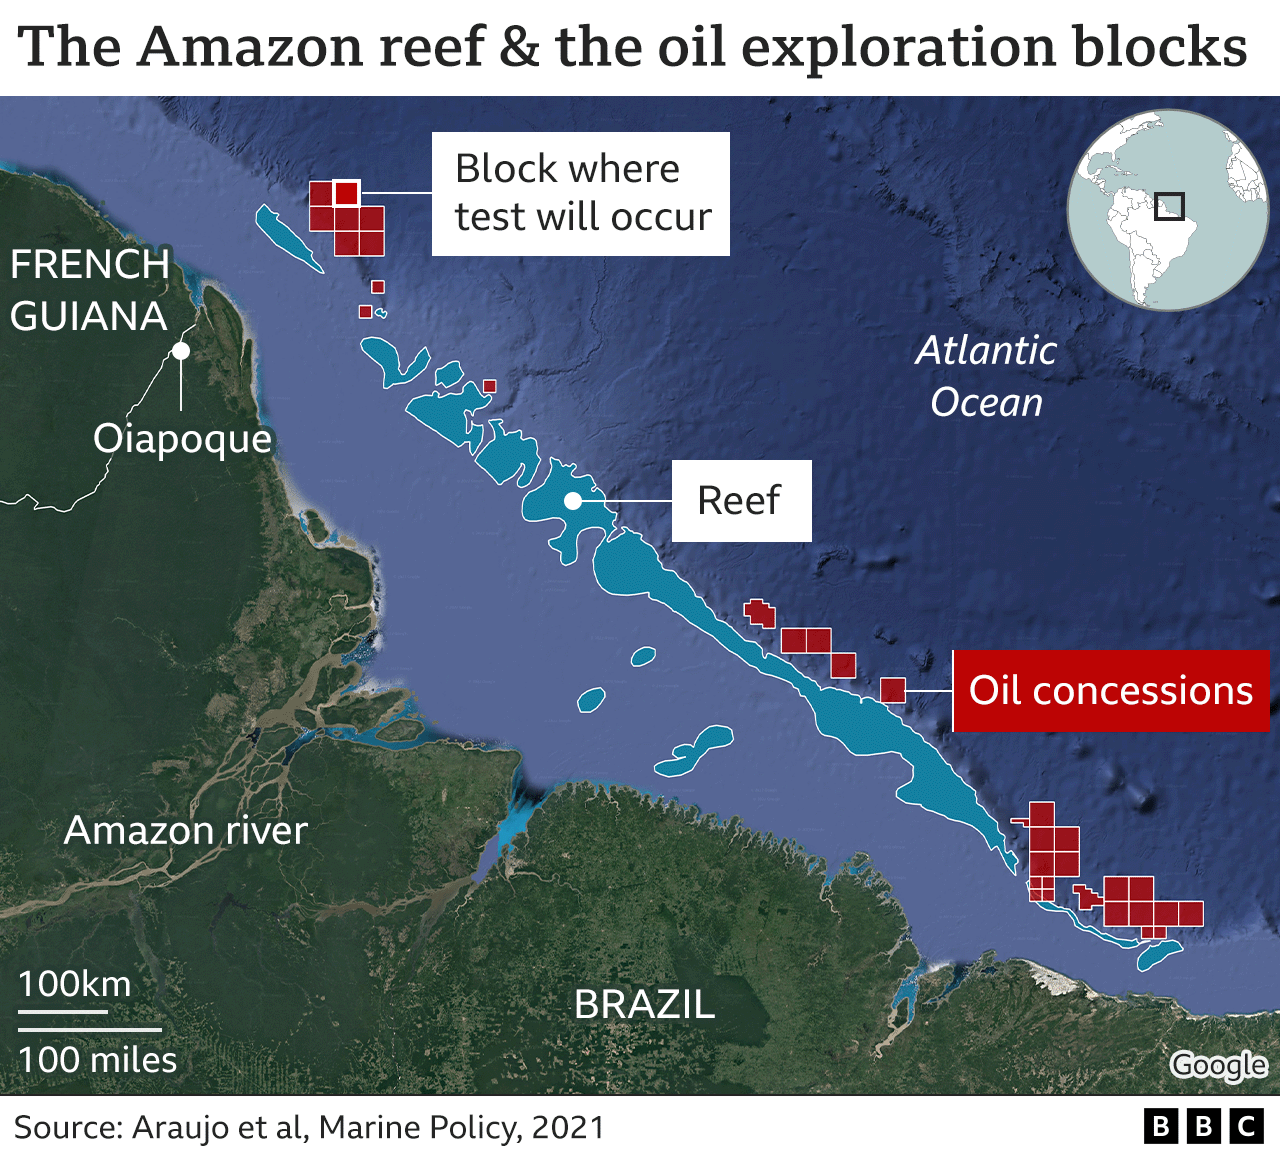 A map showing the reef and the oil concession blocks